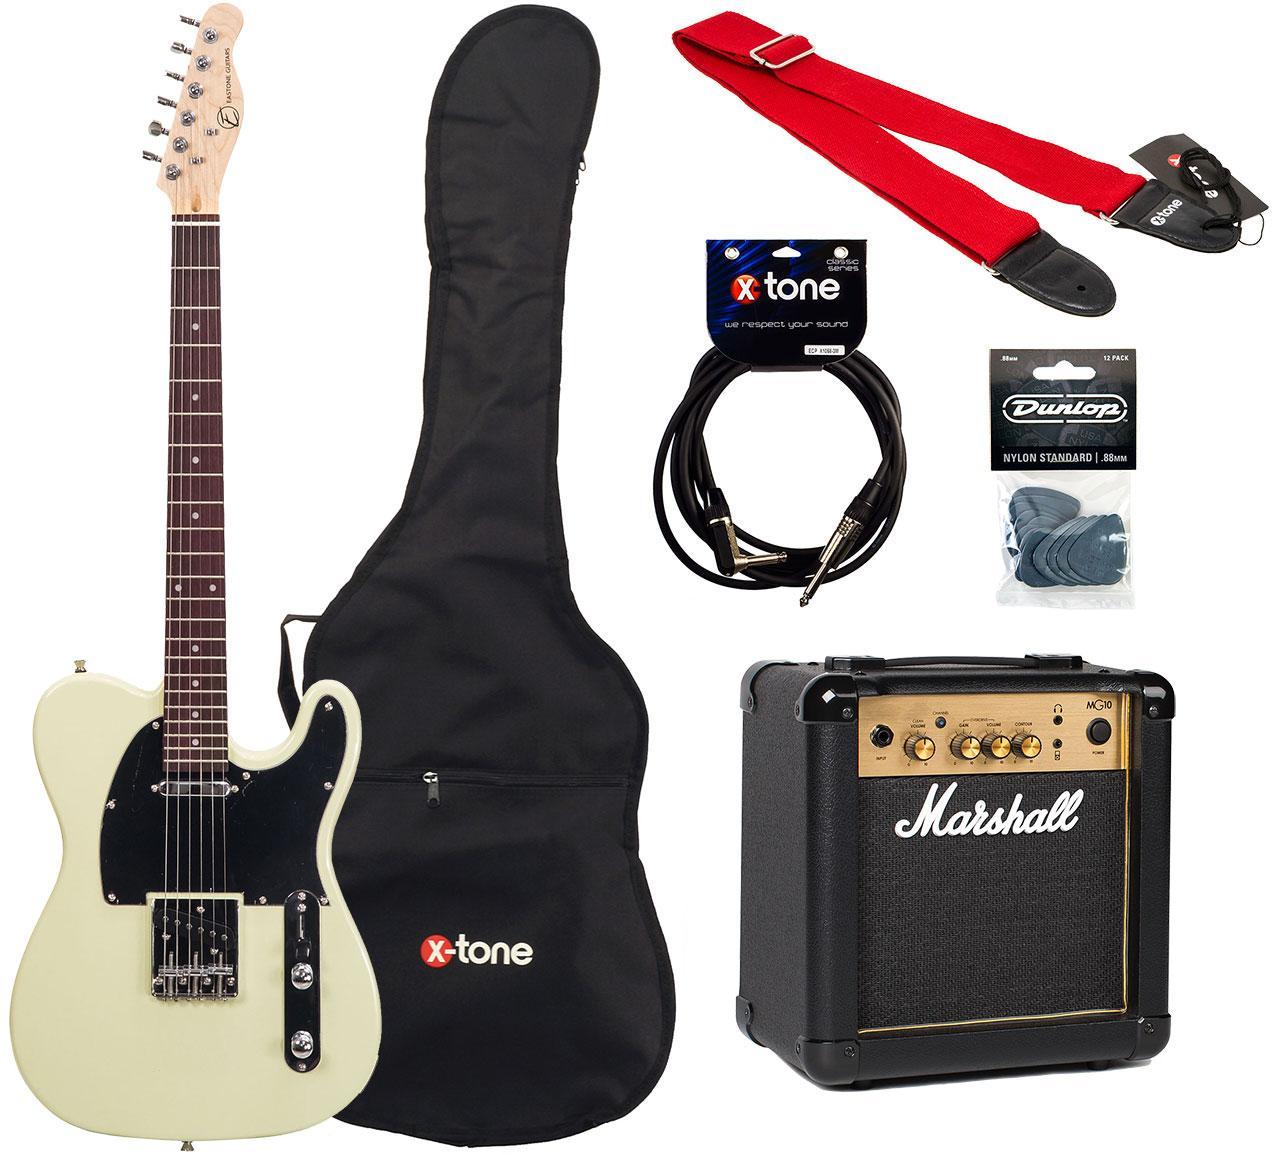 Pack guitare électrique Eastone TL70 +MARSHALL MG10 +HOUSSE +COURROIE +CABLE +MEDIATORS - Ivory